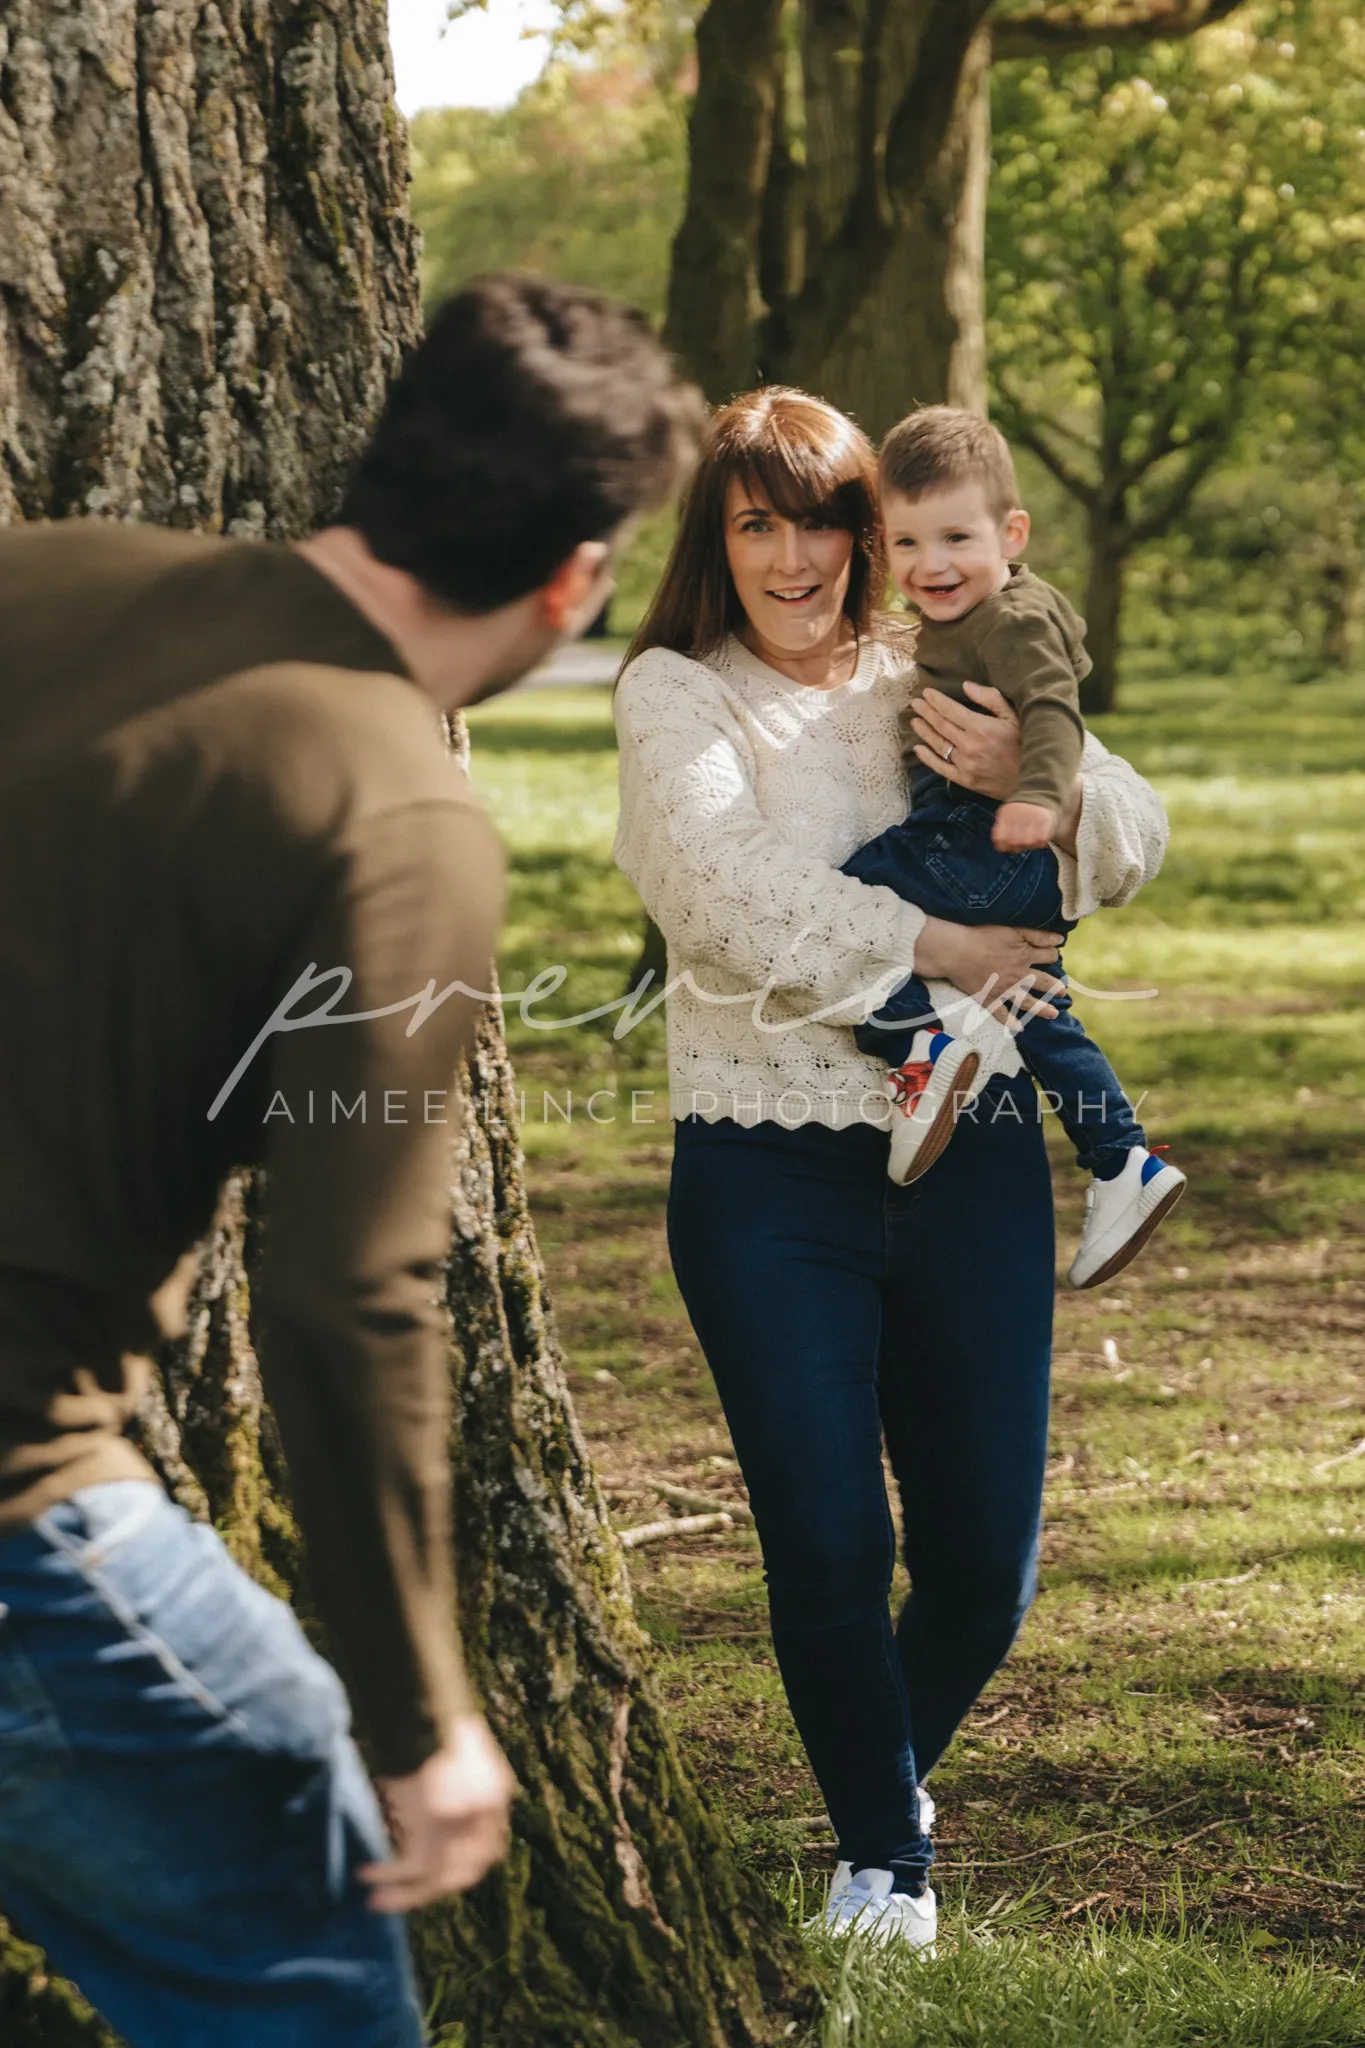 A woman holding a toddler stands smiling near a tree in a park, looking at a man partially visible on the left. the setting is sunny and verdant. both are dressed in casual attire. the mother and child are joyous and engaging with the man.